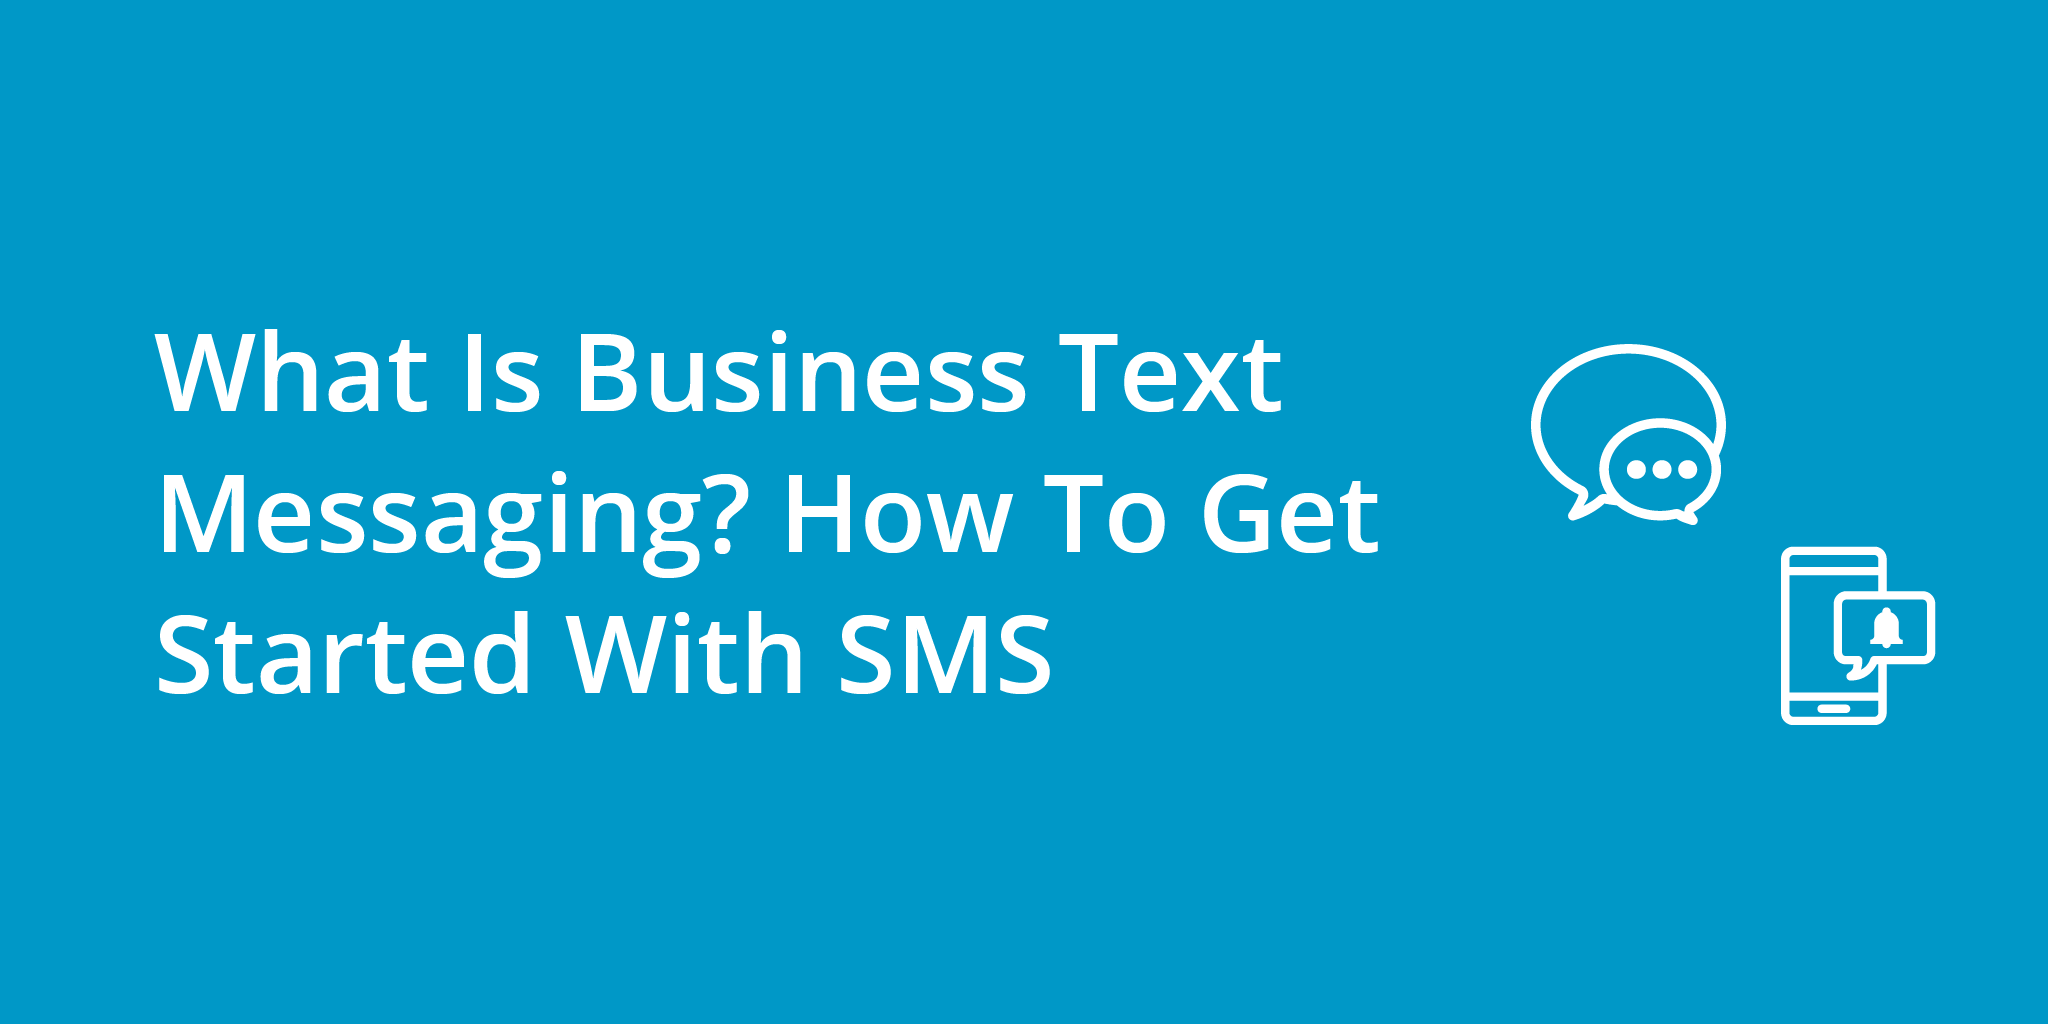 What Is Business Text Messaging? How To Get Started With SMS | Telephones for business